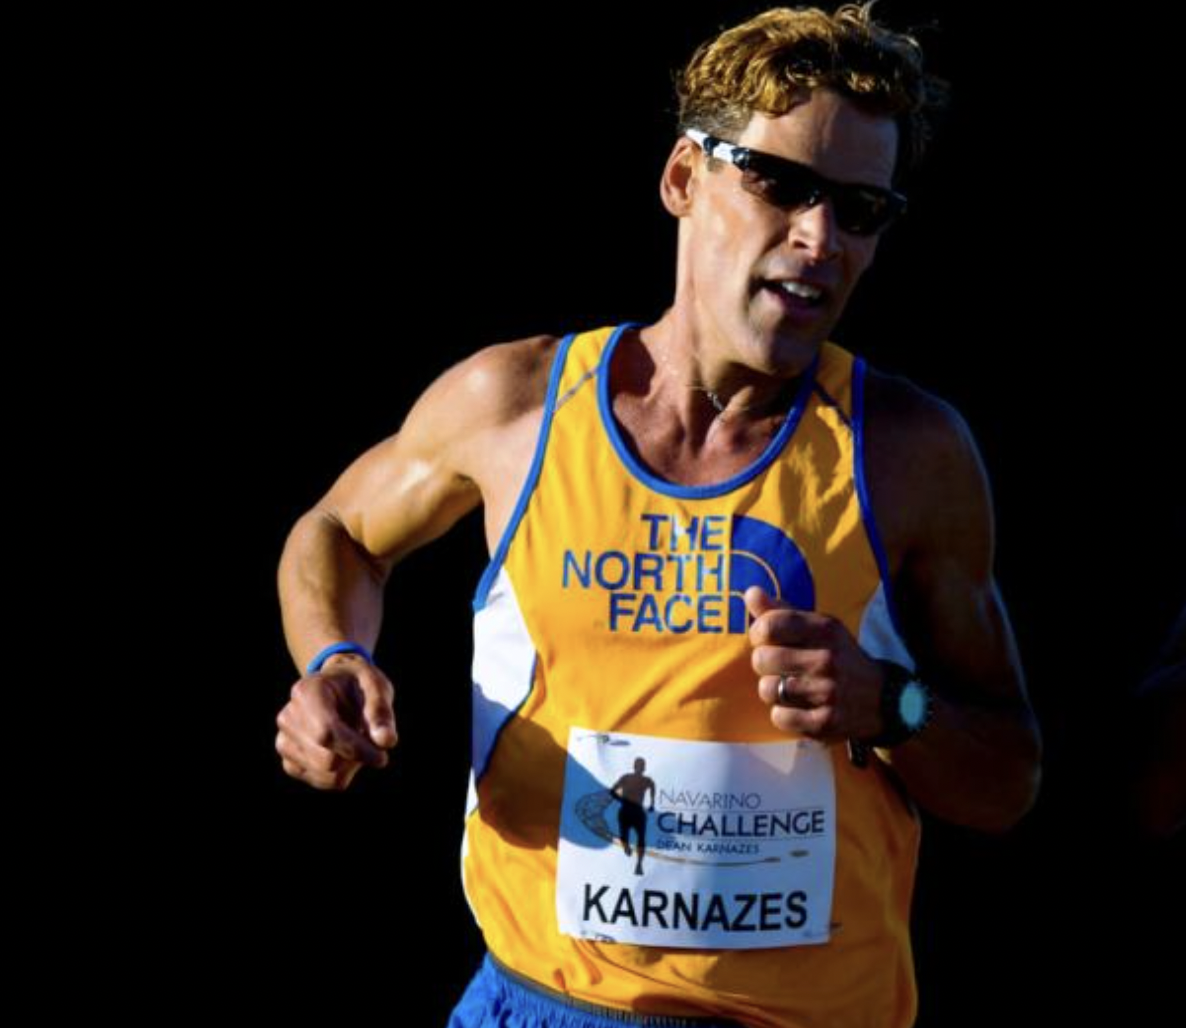 American ultra-marathon runner Dean Karnazes ran 50 marathons in 50 US states in 50 consecutive days. He then ran home to San Francisco from New York. 